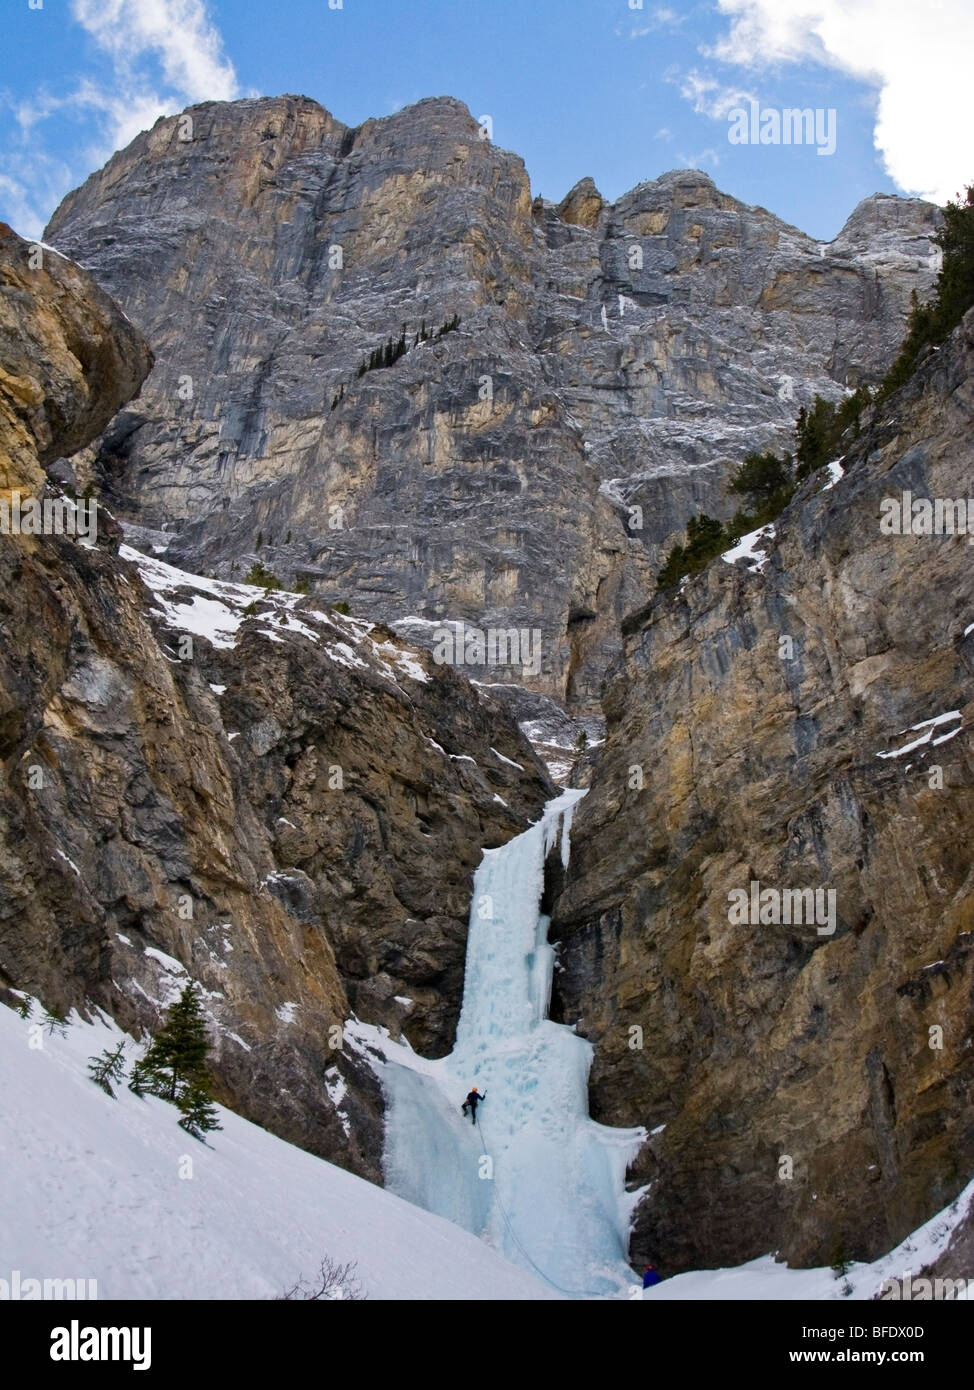 Low angle view of an ice climber making his way up Professor Falls WI 4, Banff National Park, Alberta, Canada Stock Photo